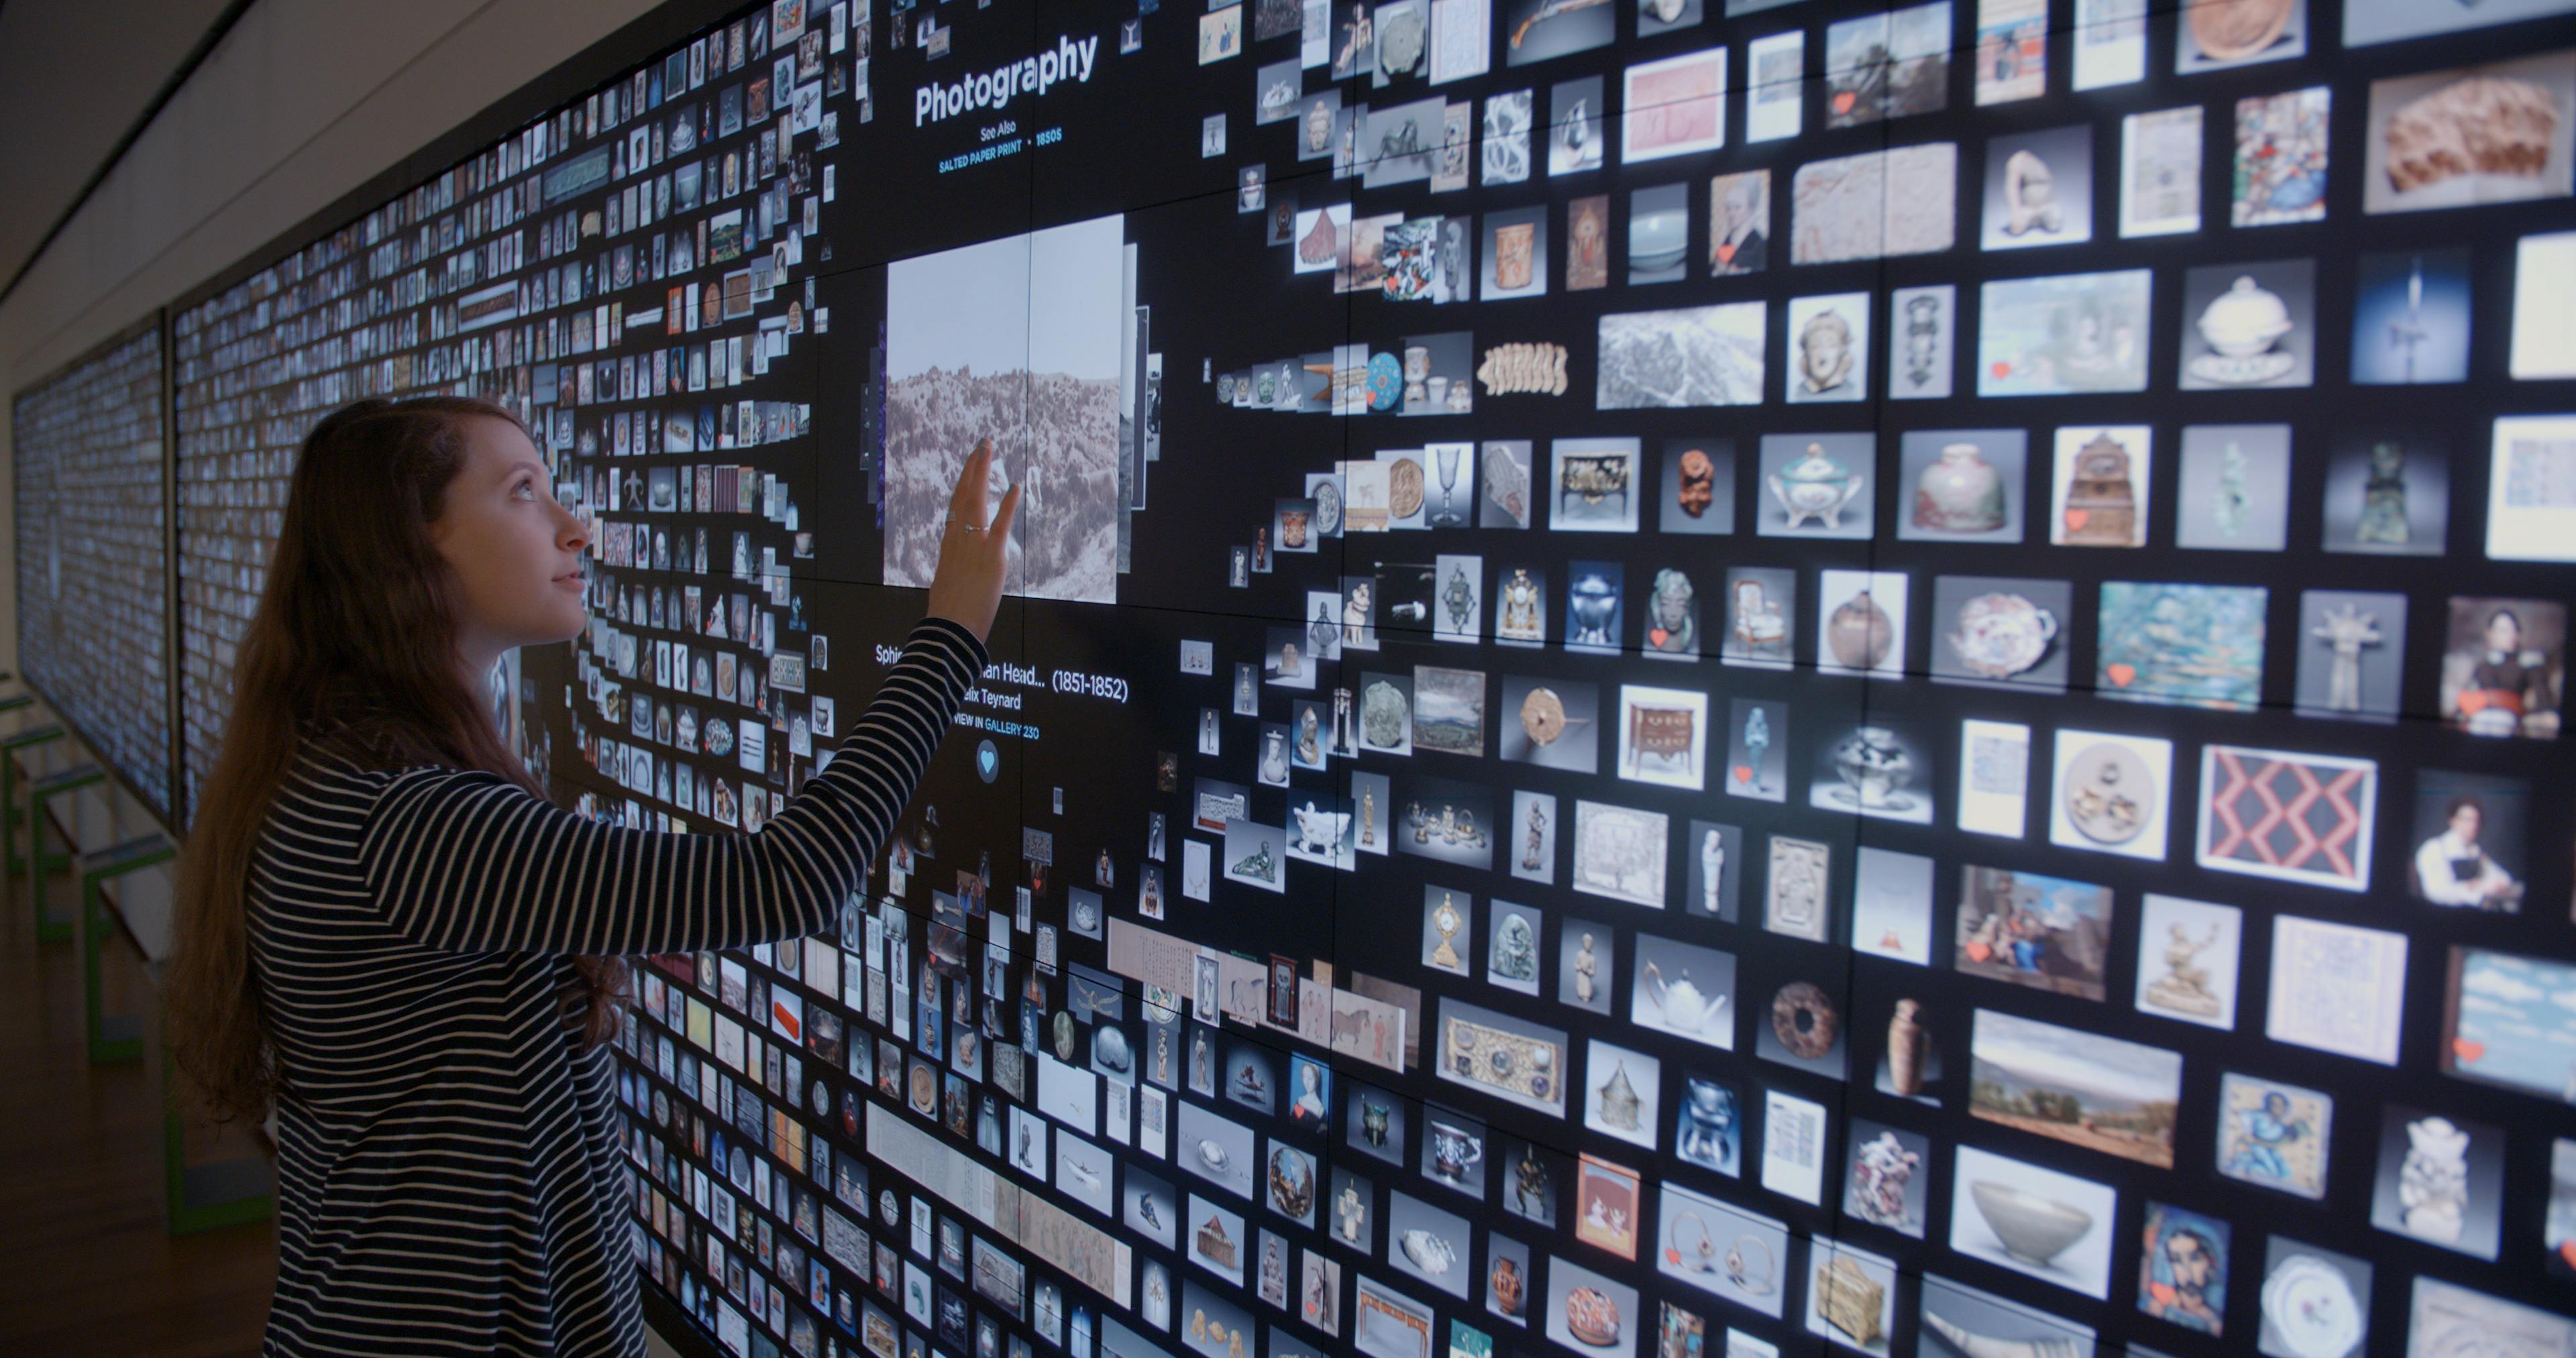 A visitor interacting with the ArtLens Wall